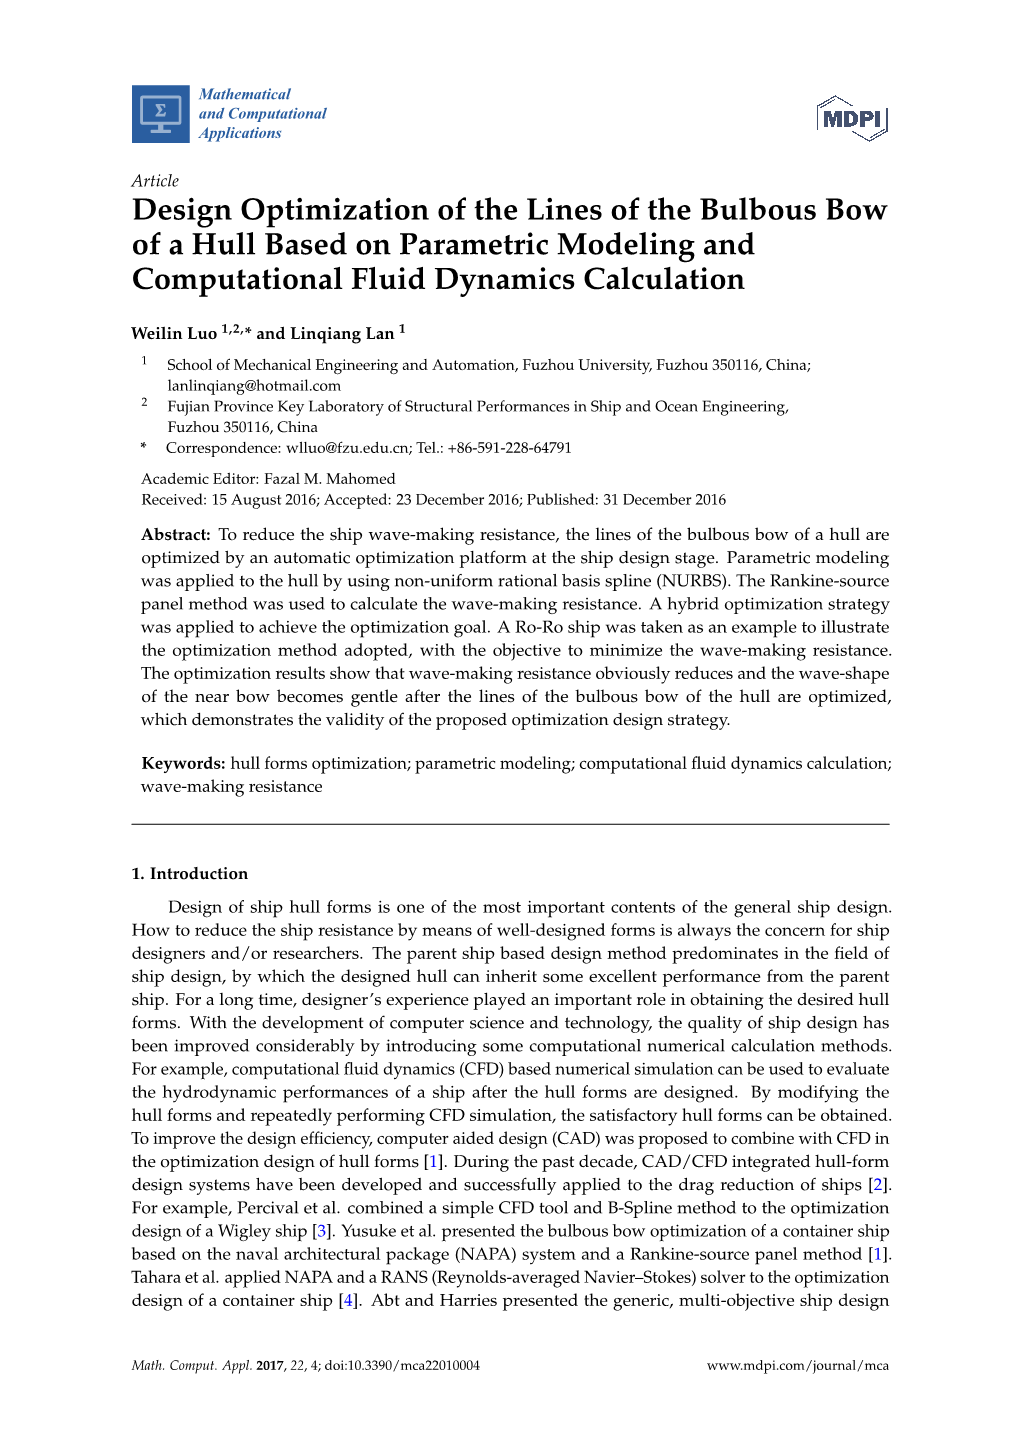 Design Optimization of the Lines of the Bulbous Bow of a Hull Based on Parametric Modeling and Computational Fluid Dynamics Calculation